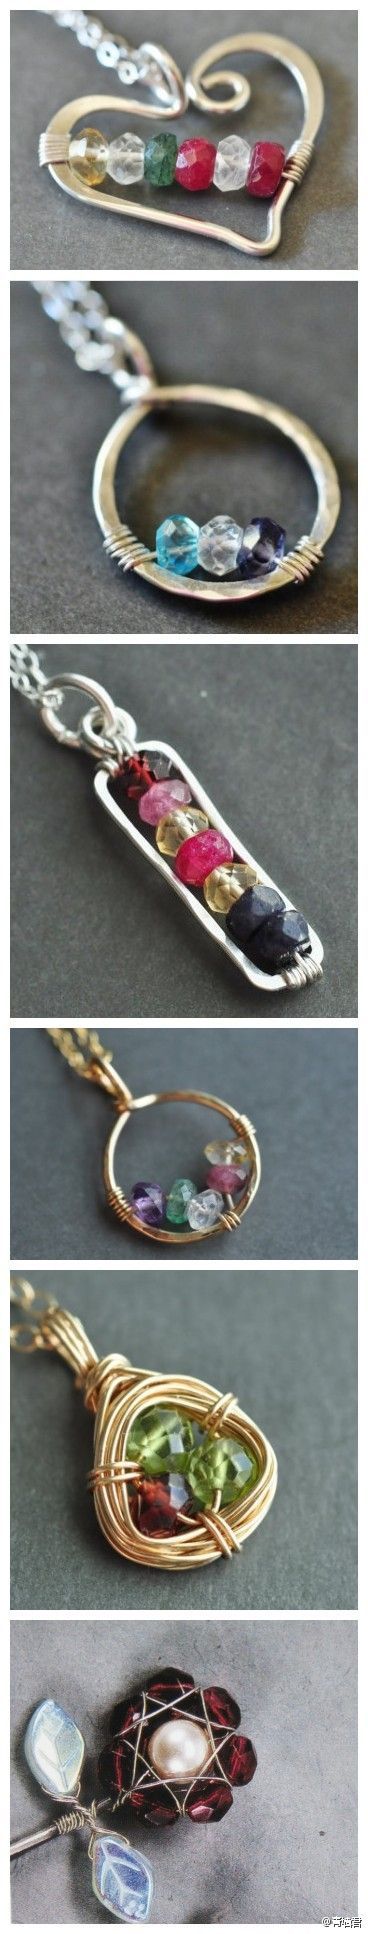 my sister-in-law, showed me how to make this bent wire jewelry, although I’m not as good at it as she is!